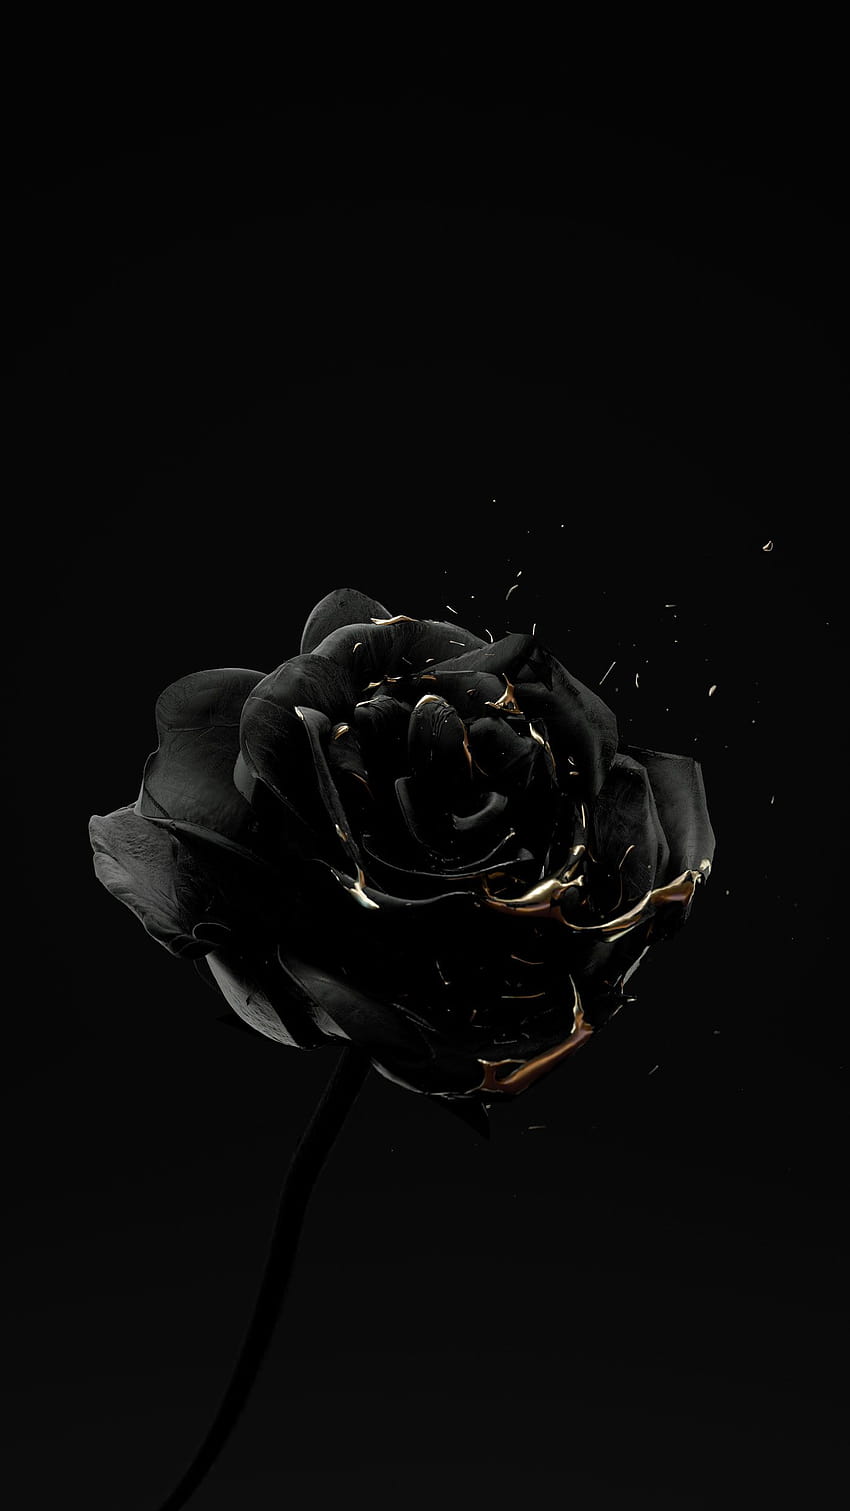 Roses Are Dead – Vol. 4 “Black and Gold” on Behance, dying rose HD phone wallpaper